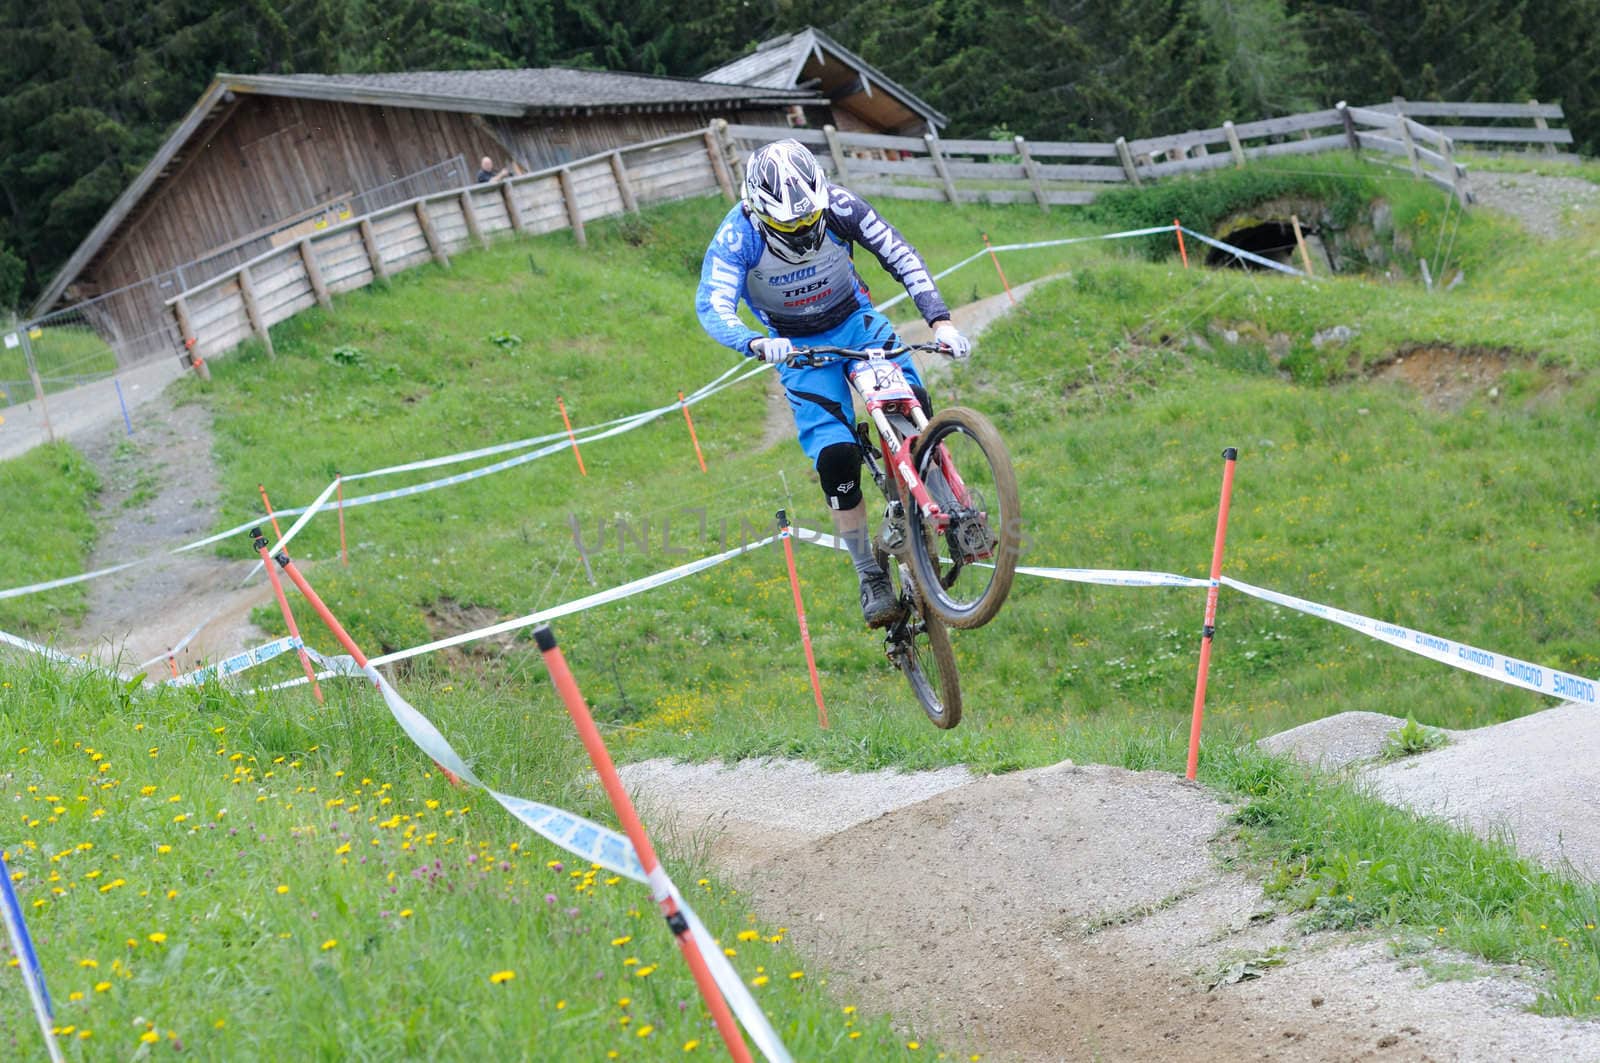 LEOGANG, AUSTRIA - JUN 12: UCI Mountain bike world cup. Harry Heath (GBR) at the downhill final race on June 12, 2011 in Leogang, Austria.